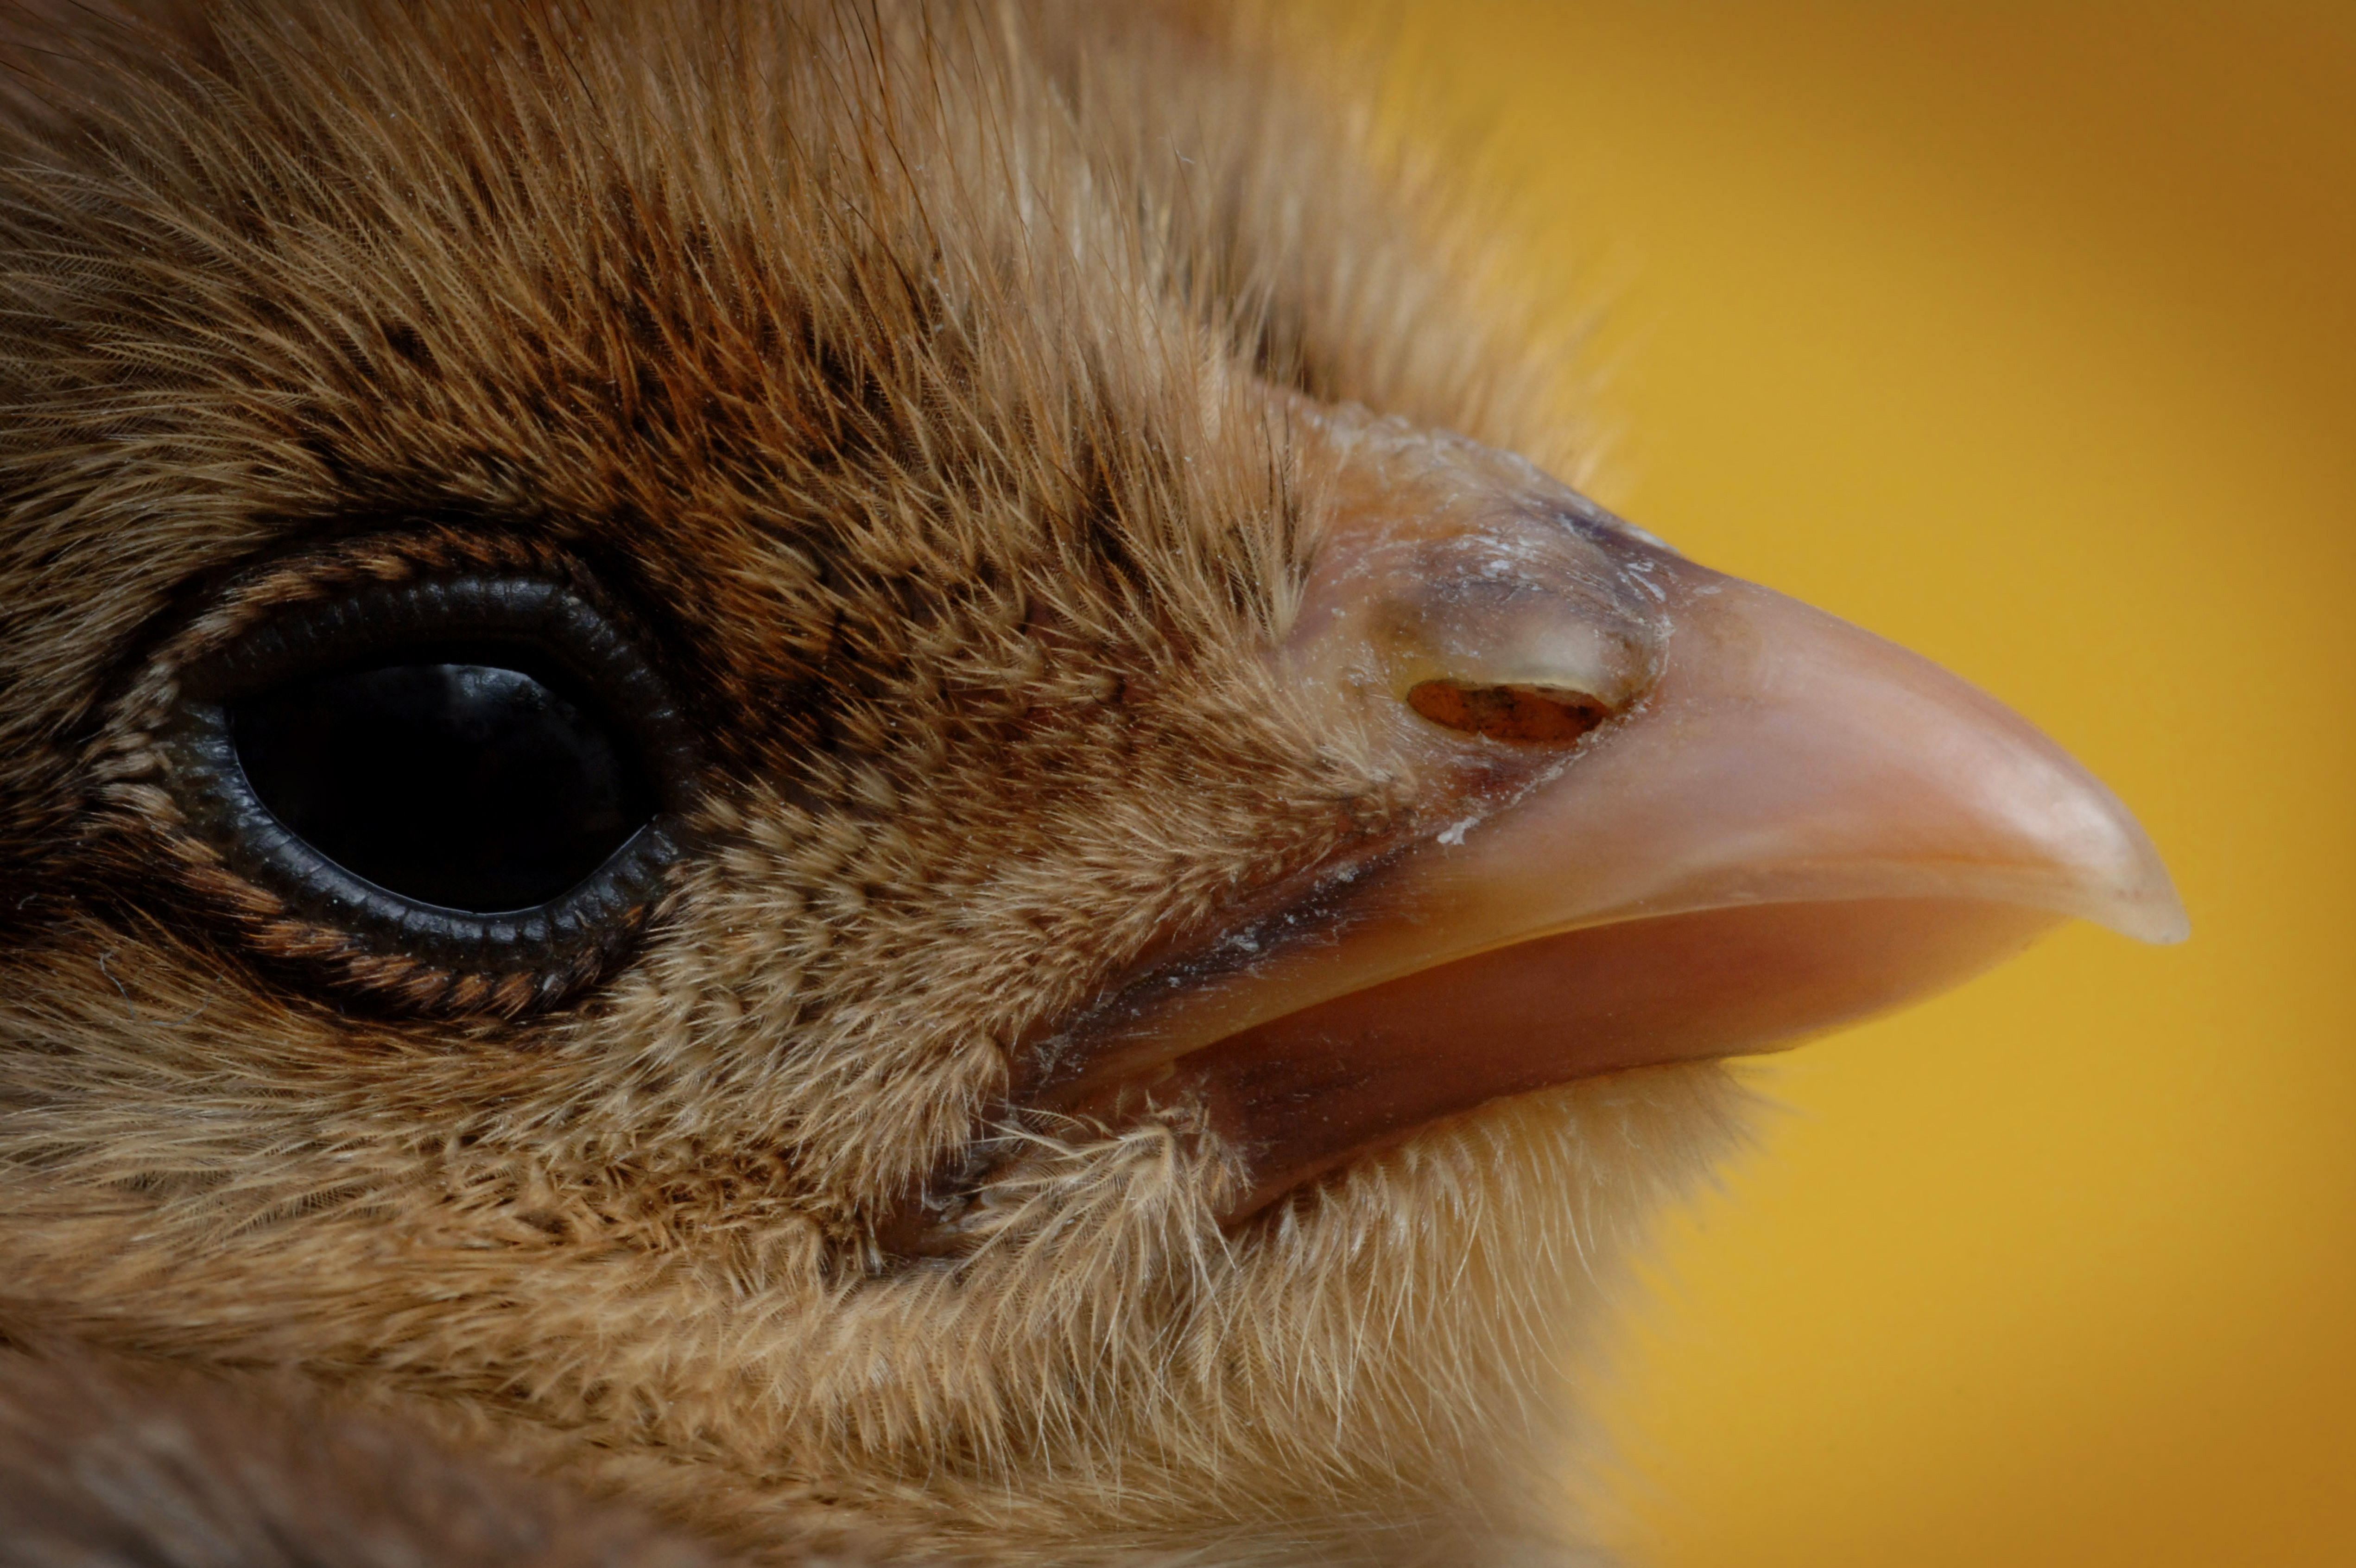 Beak trimming is permitted on birds up to 10 days old using infra-red technology but in practice it is carried out at day-old by trained operators. Photo: Medicimage/REX/Shutterstock